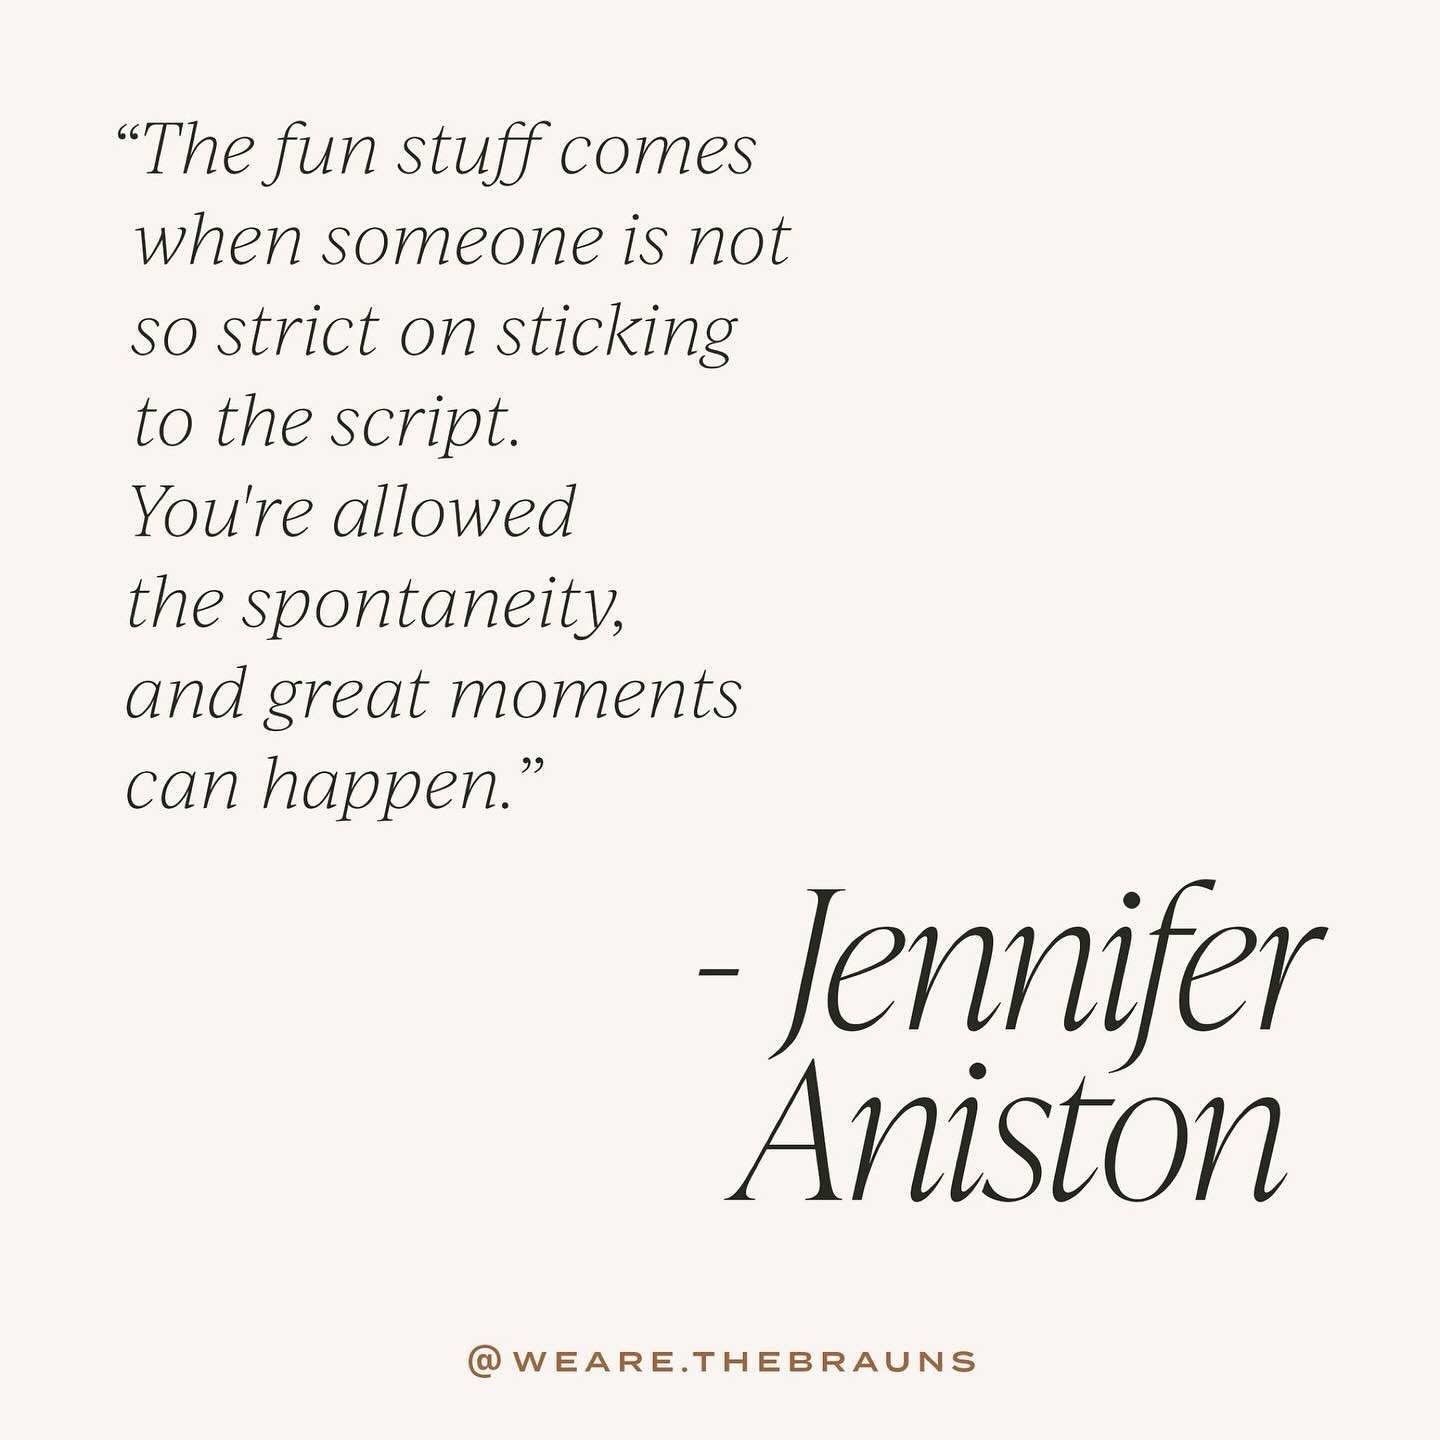 Jen gets it. The greatest moments are spontaneous.

It can be tempting to base your wedding day on a fixed schedule and expect perfection. The reality is that your wedding day isn&rsquo;t a photo shoot where a wedding happens. Your vendors aren&rsquo